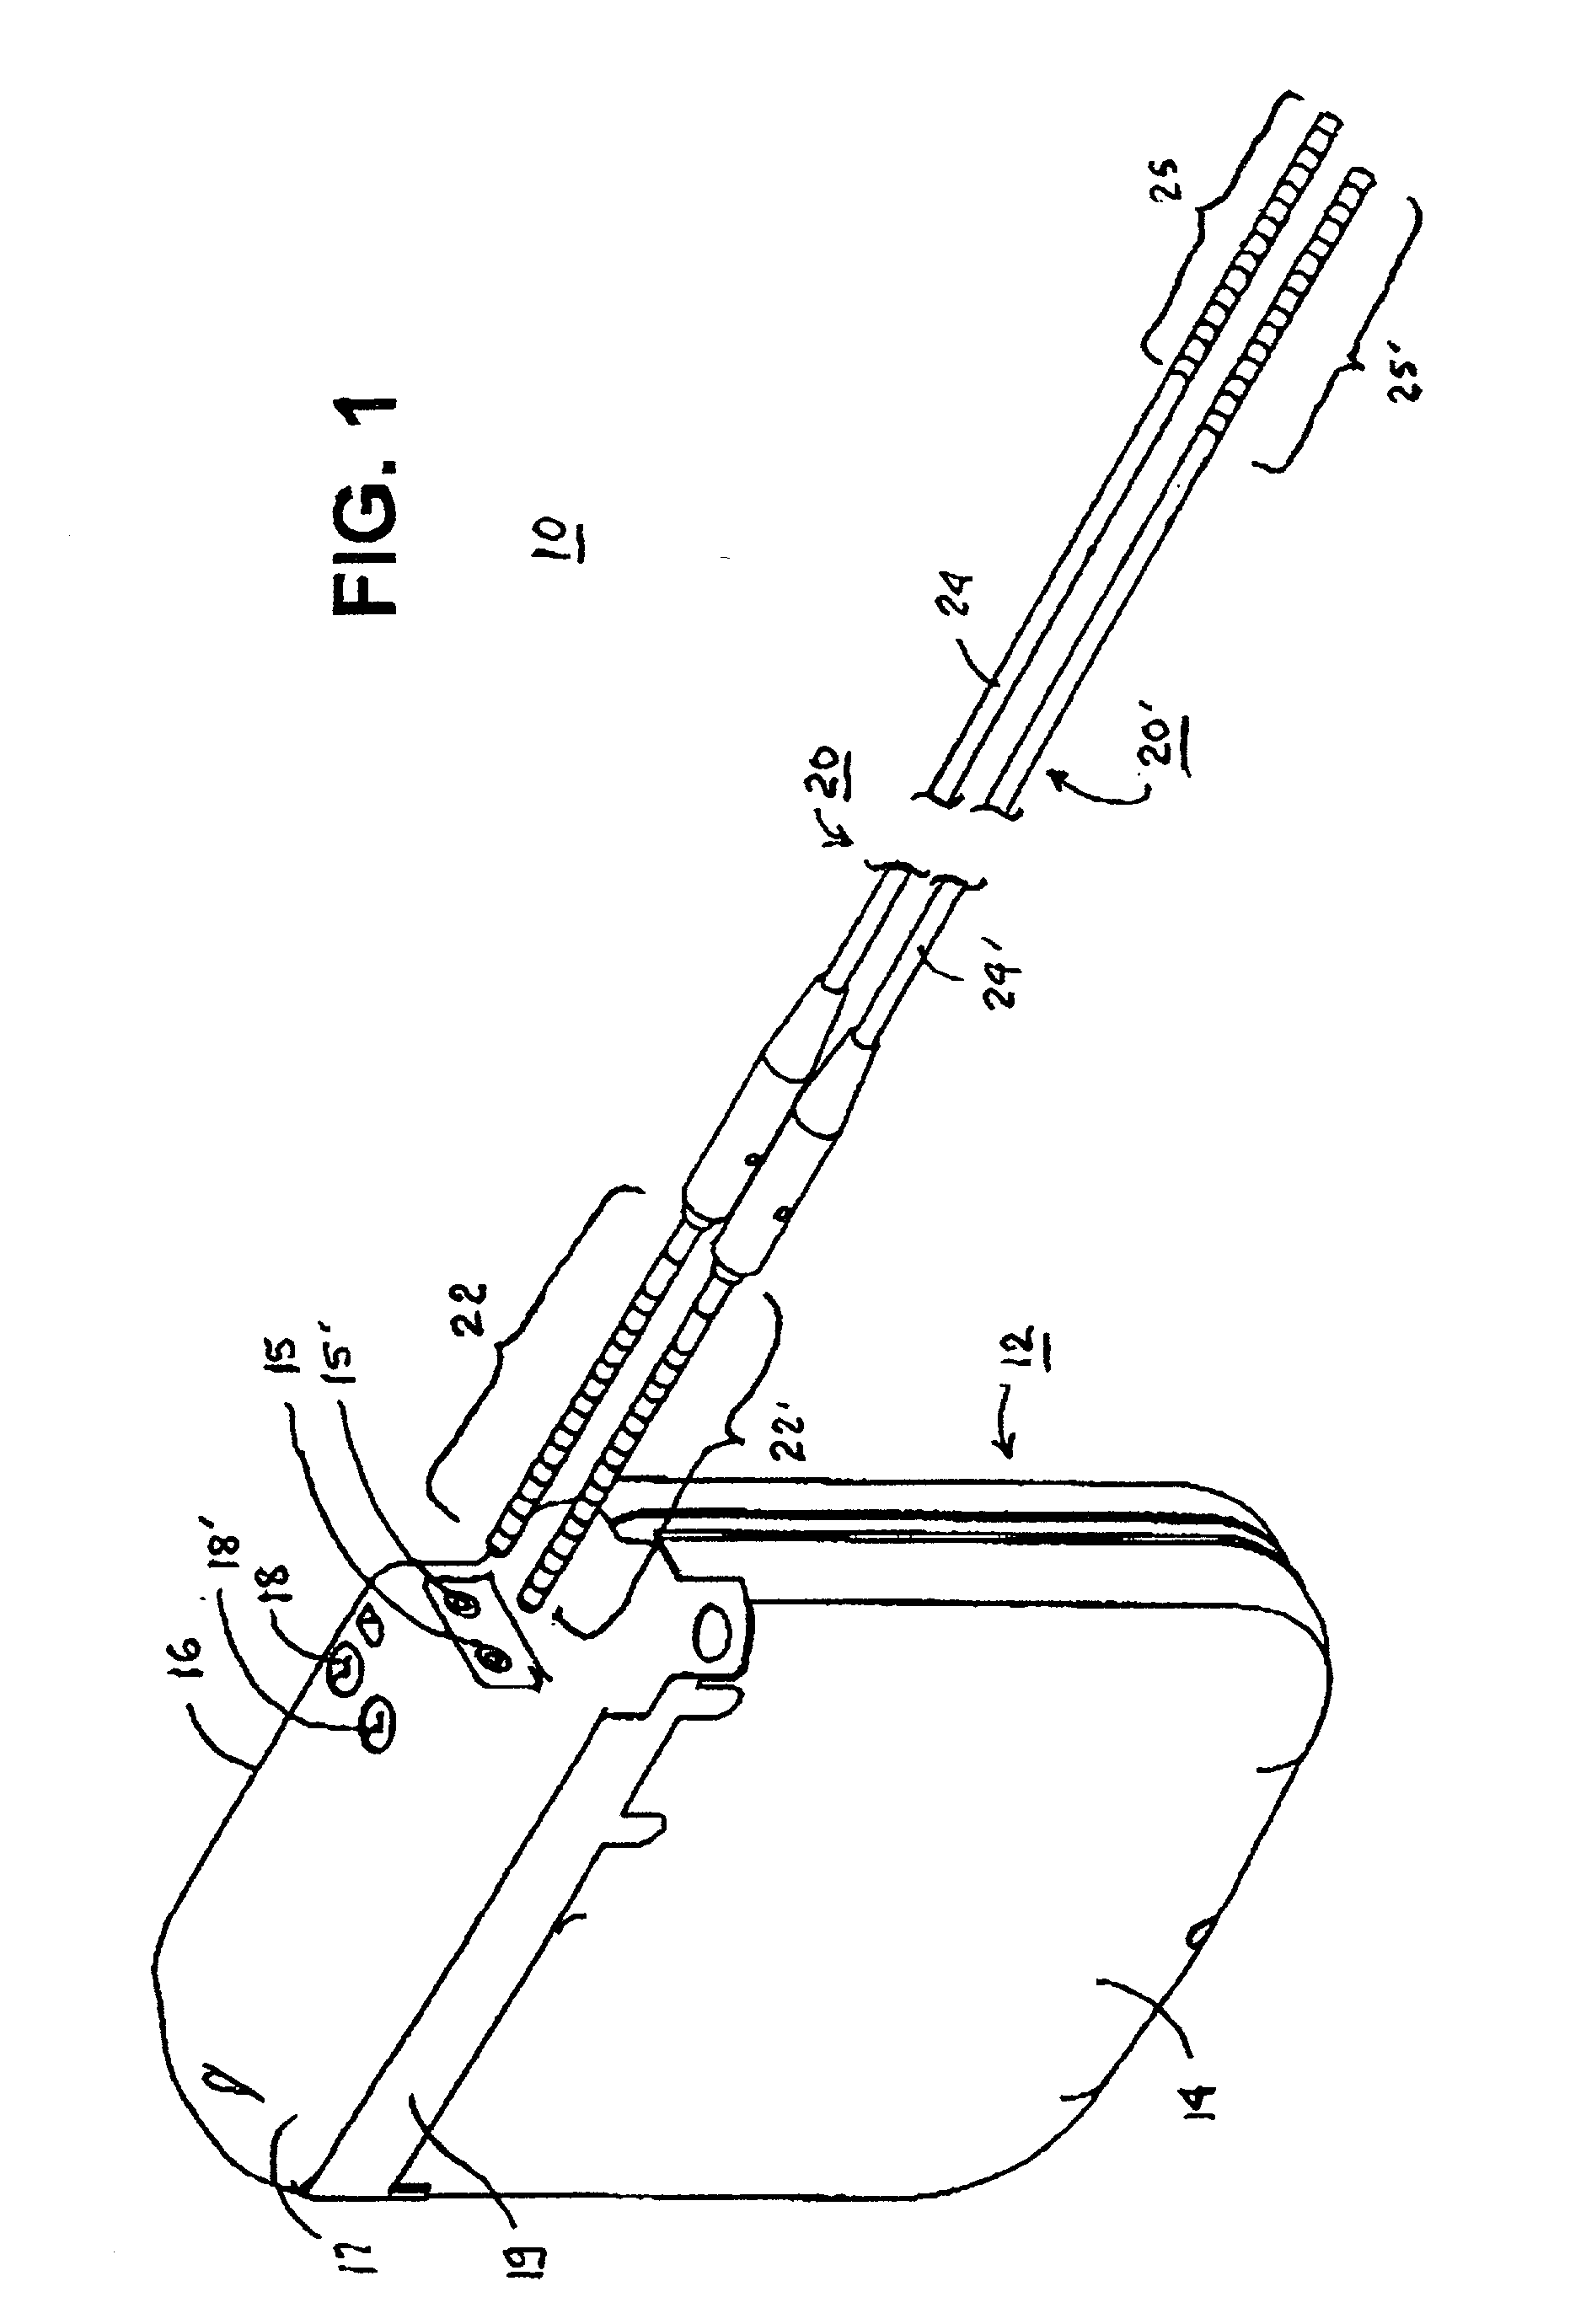 In-line lead header for an implantable medical device